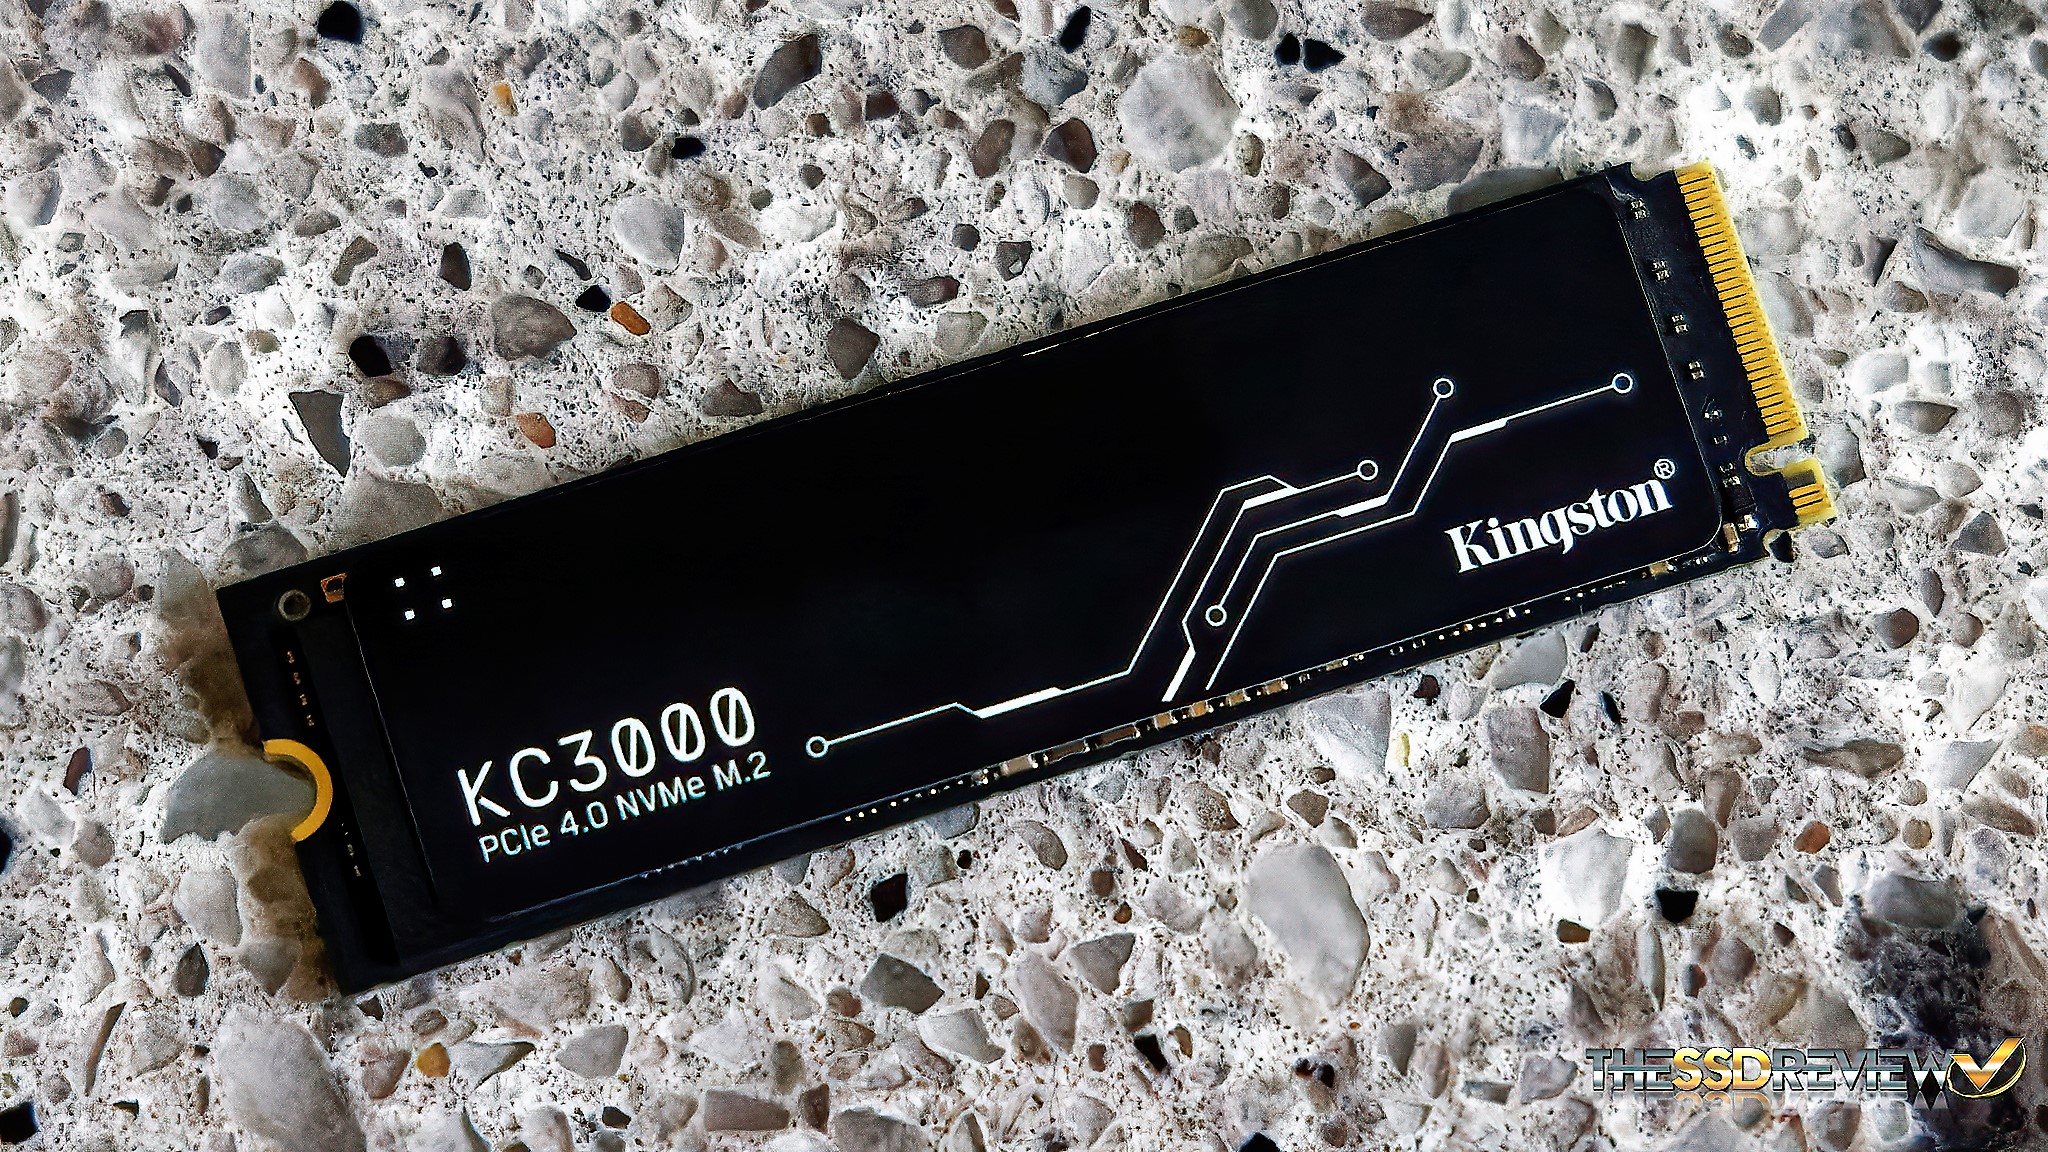 Kingston KC3000 PCIe 4.0 NVME SSD Review - Did Kingston Just Release a  'Game' Changer?